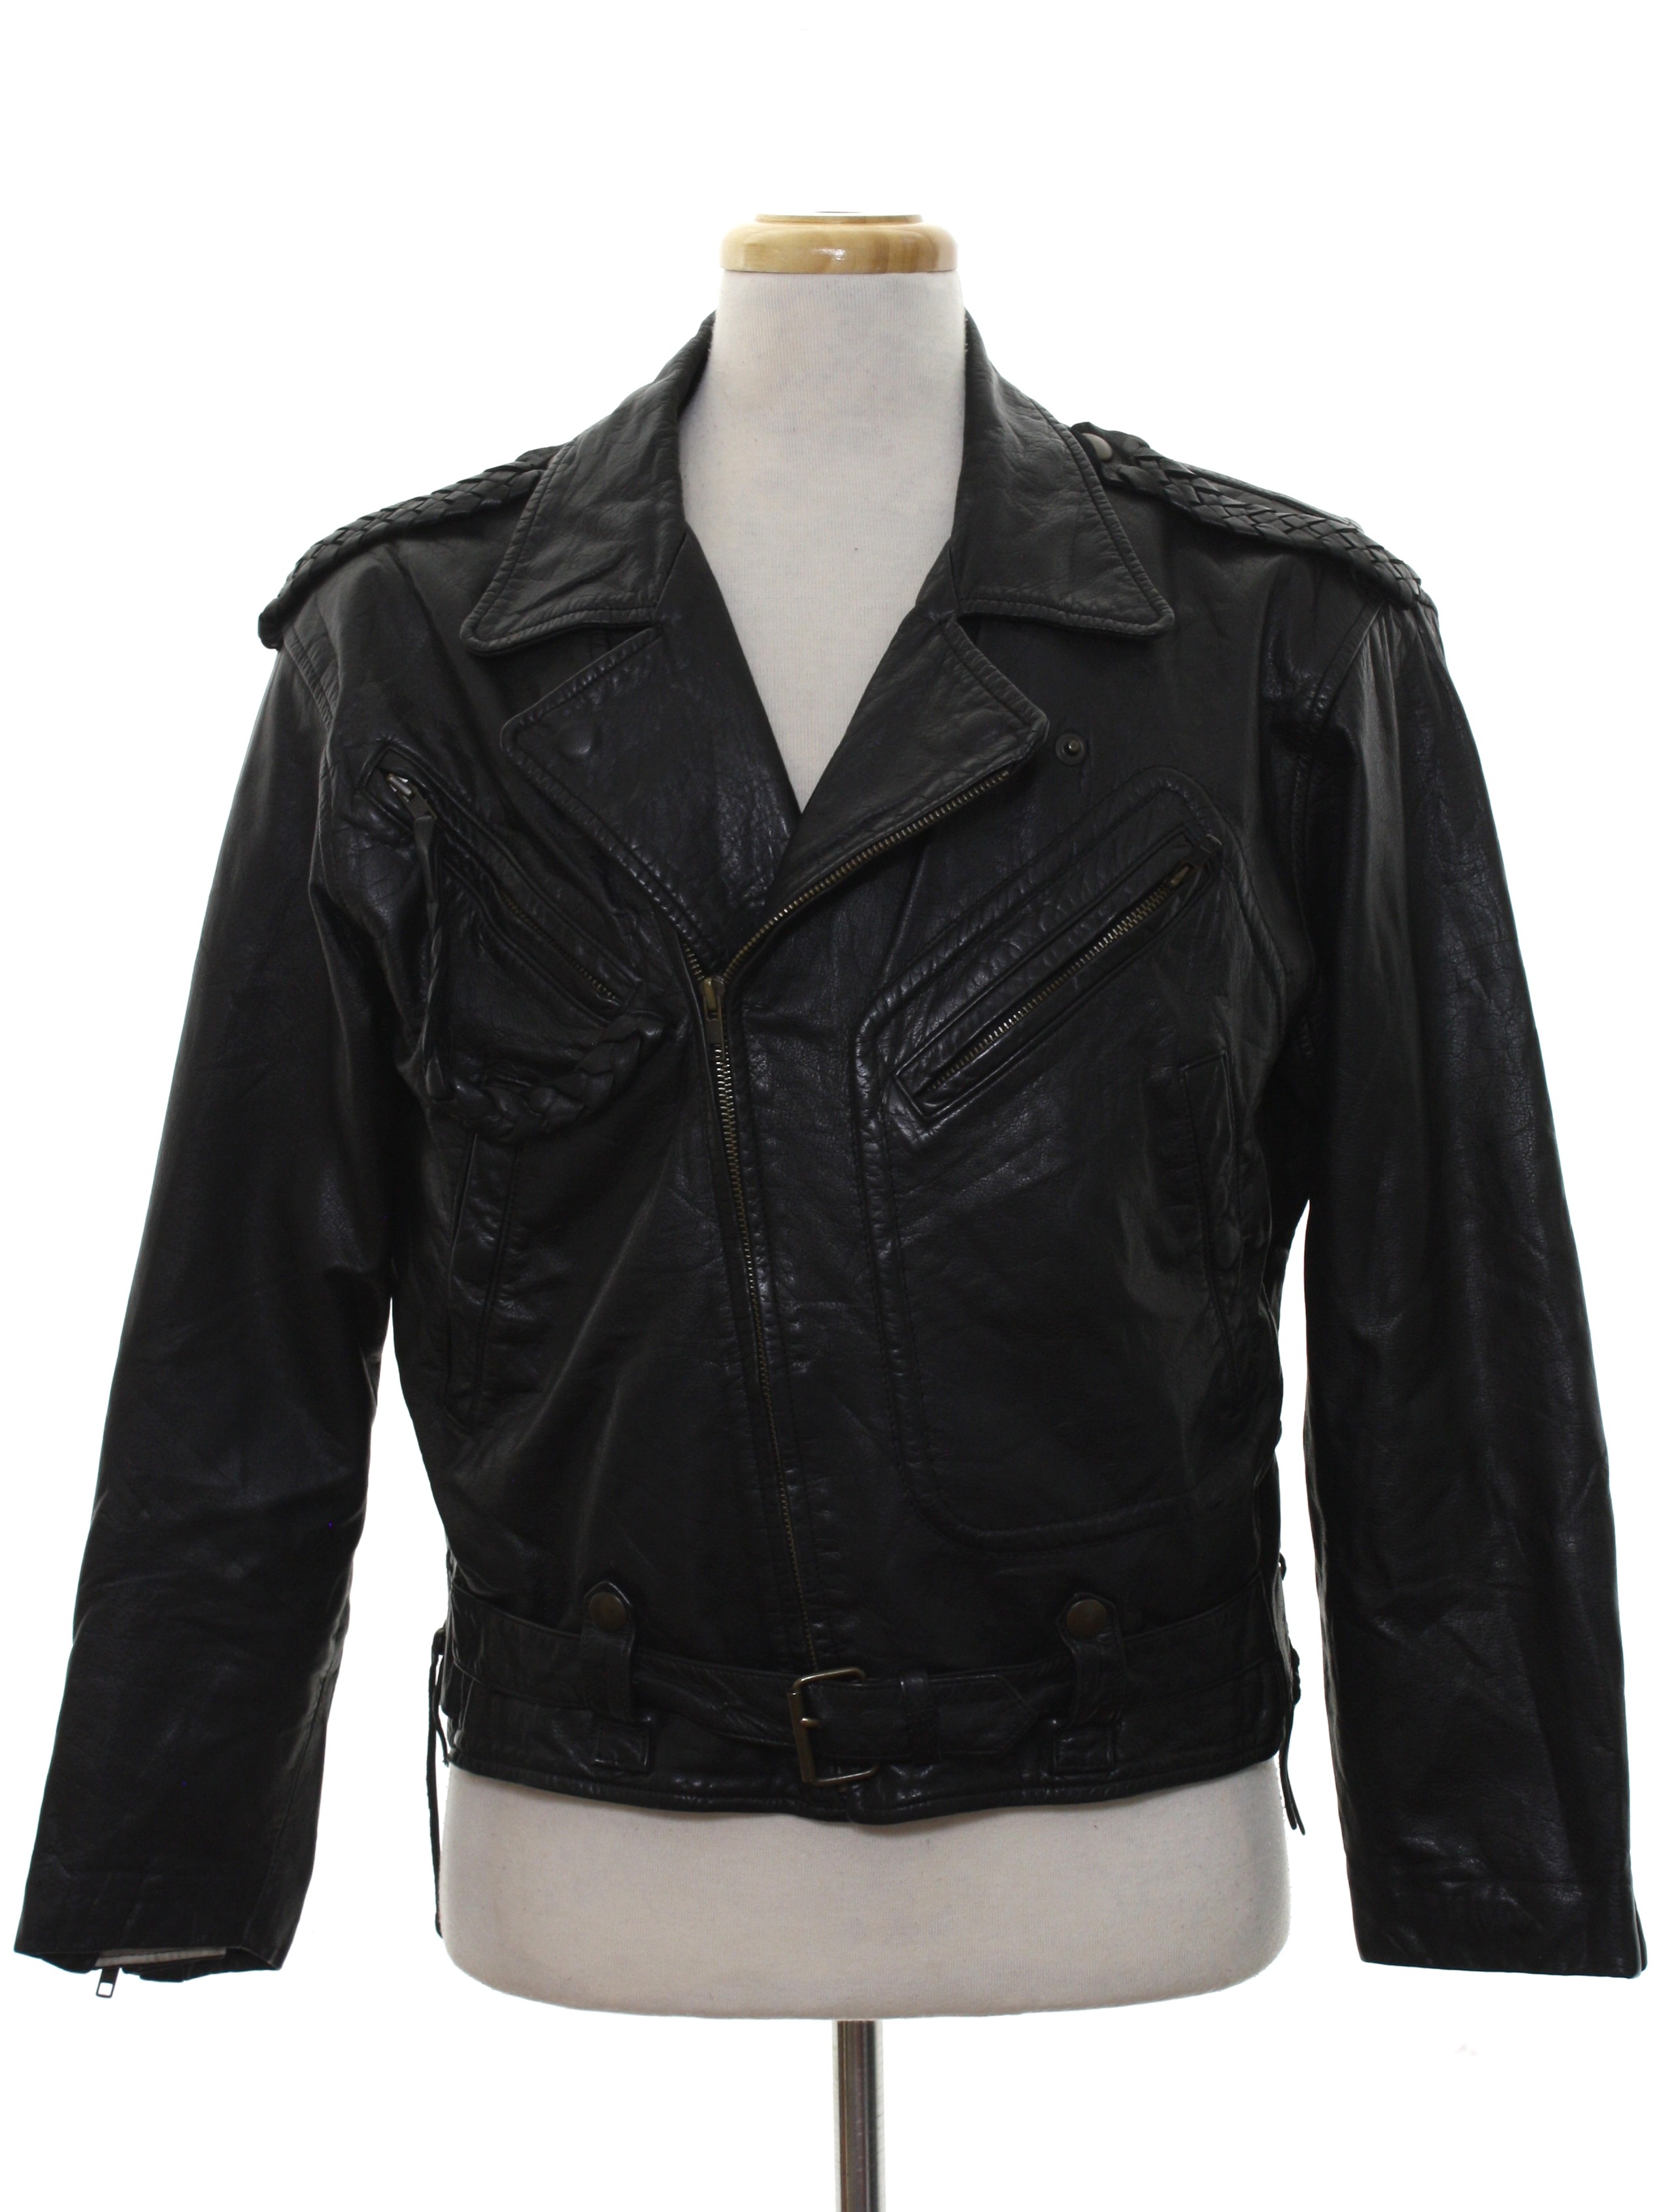 1980's Leather Jacket (Armani Jeans): Late 80s or Early 90s -Armani ...